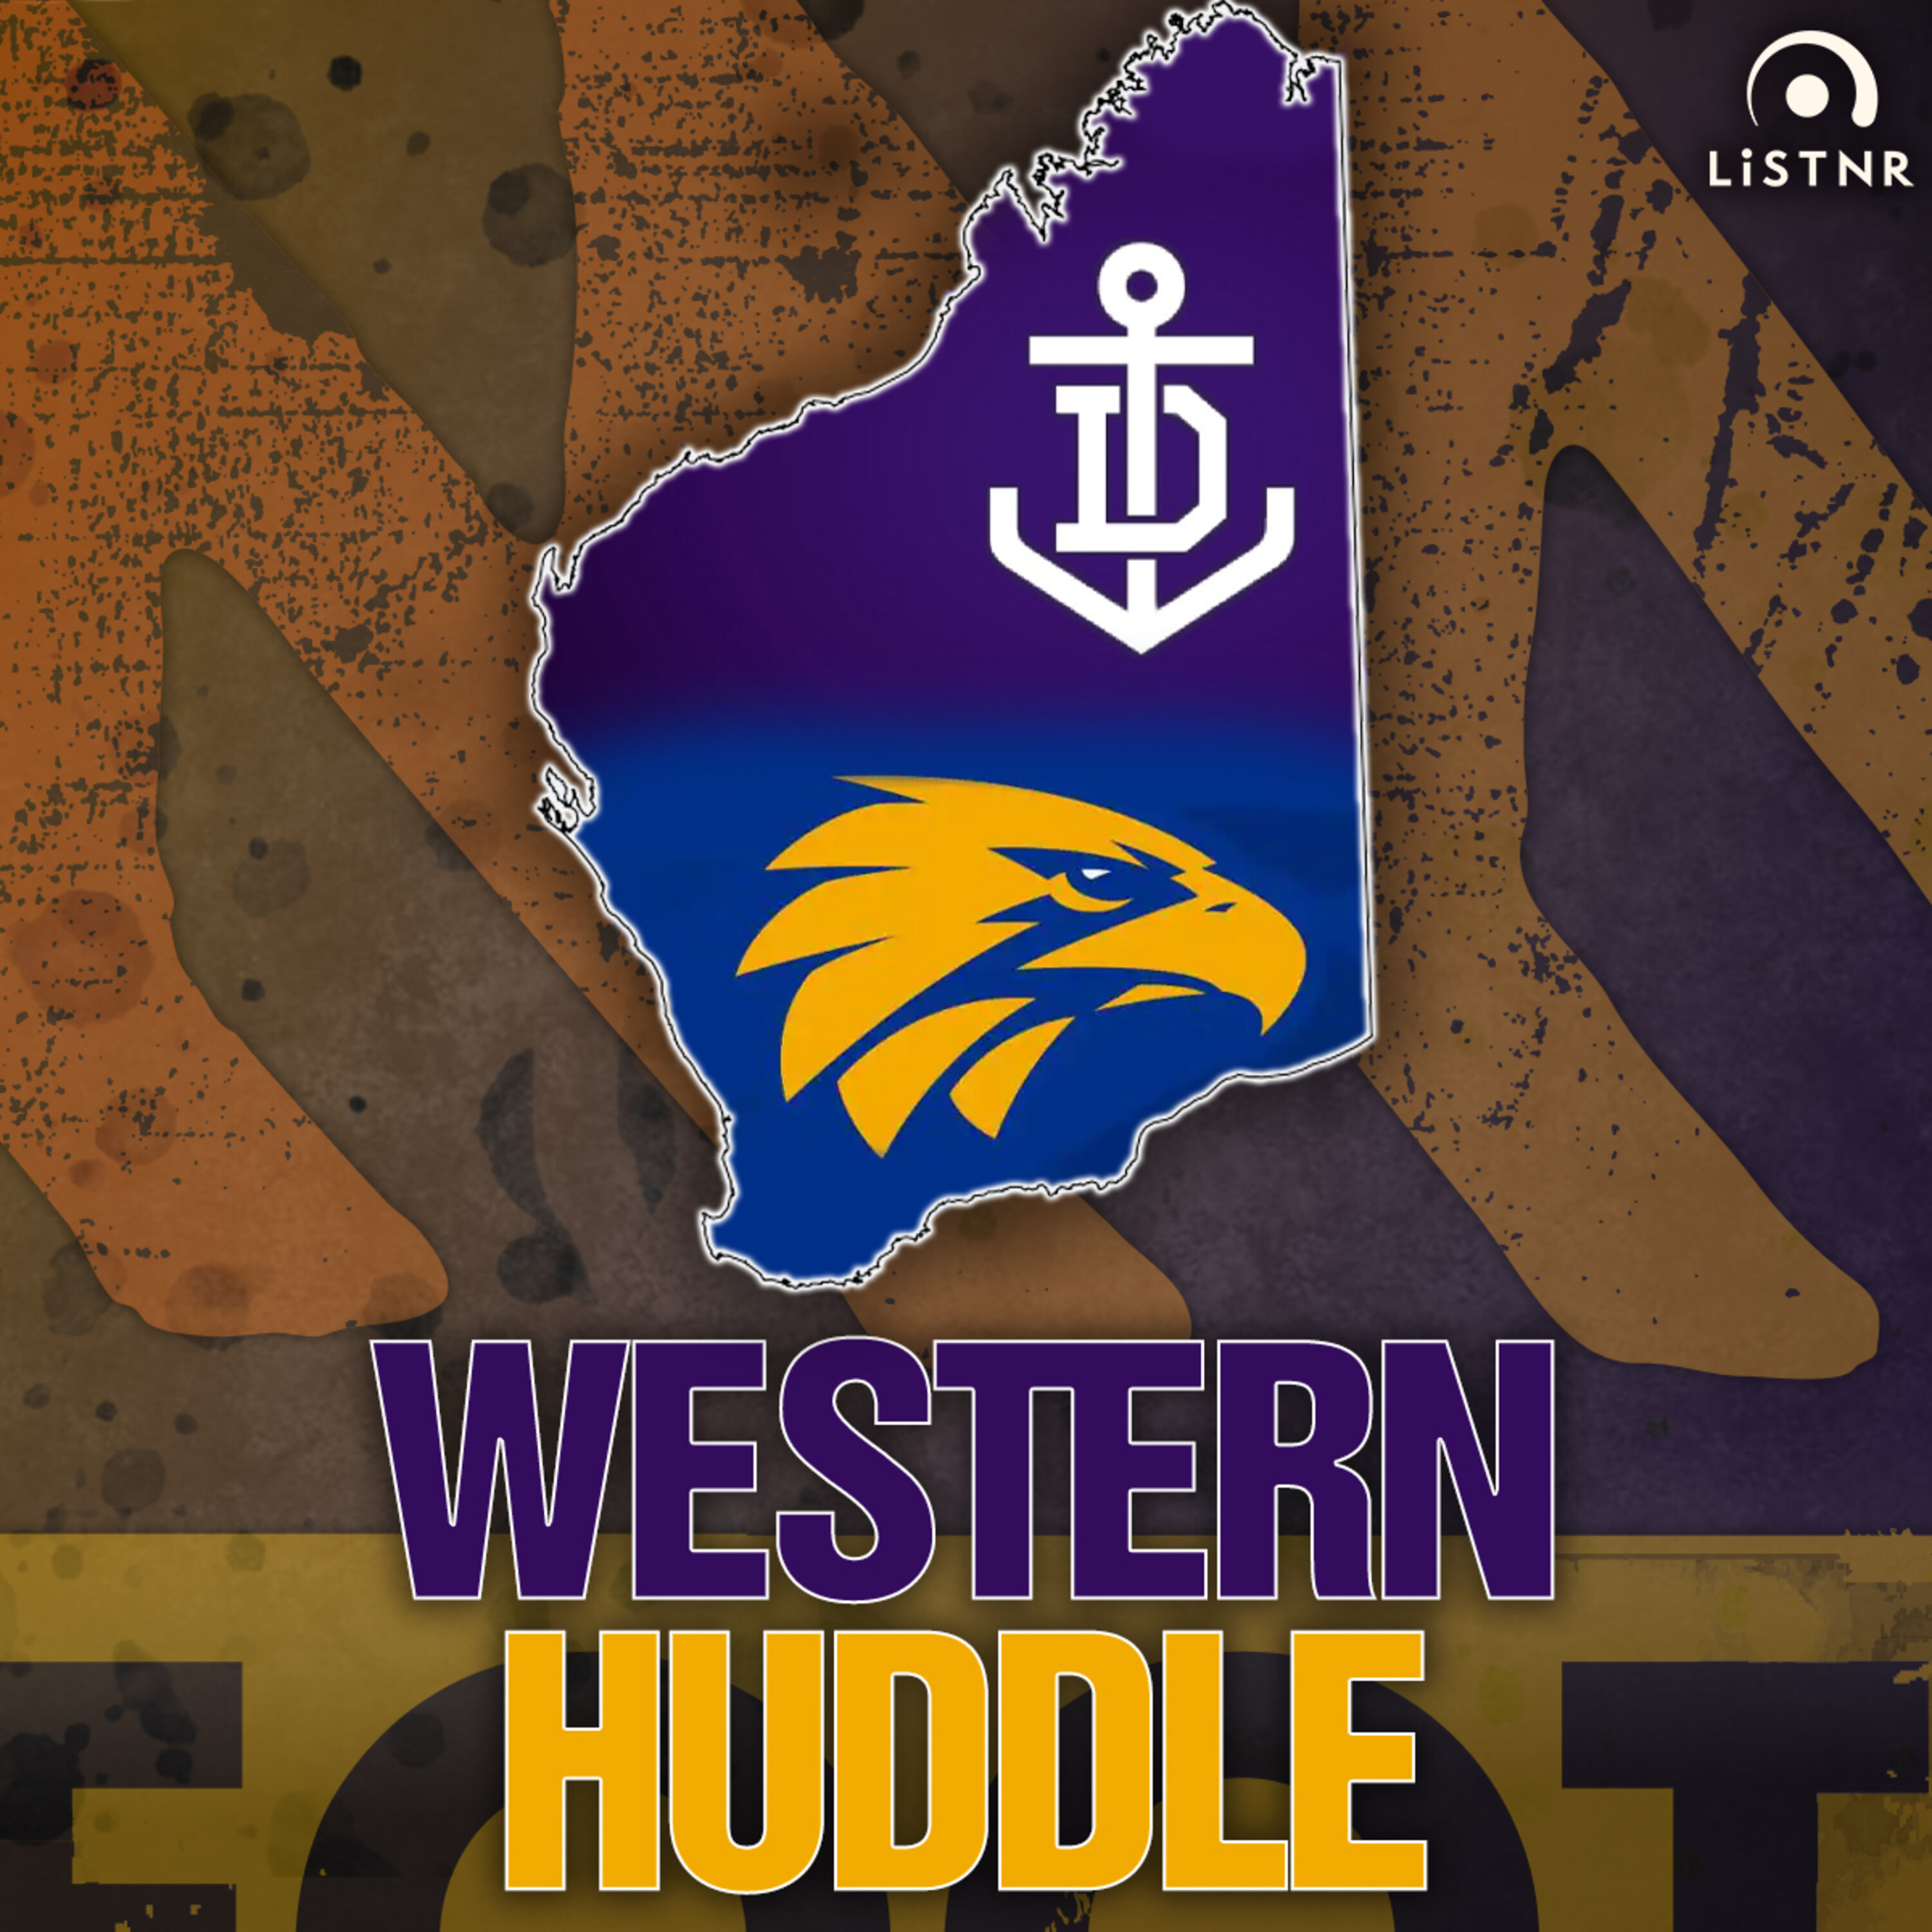 WESTERN HUDDLE | Are Freo back?, a deep dive on West Coast's list management, should rebuilding teams take picks or players?